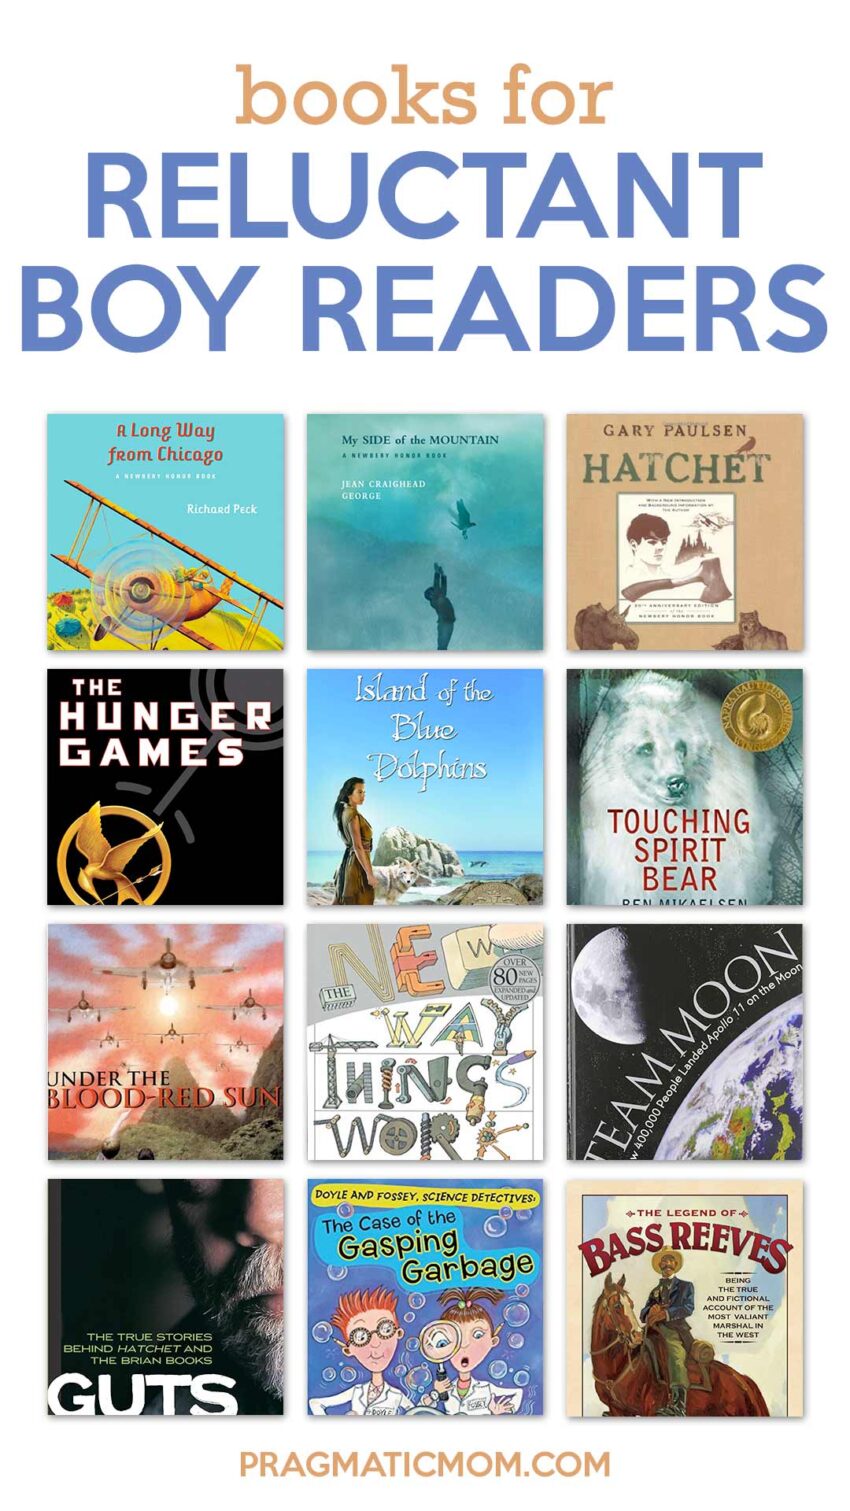 Books for Reluctant Boy Readers